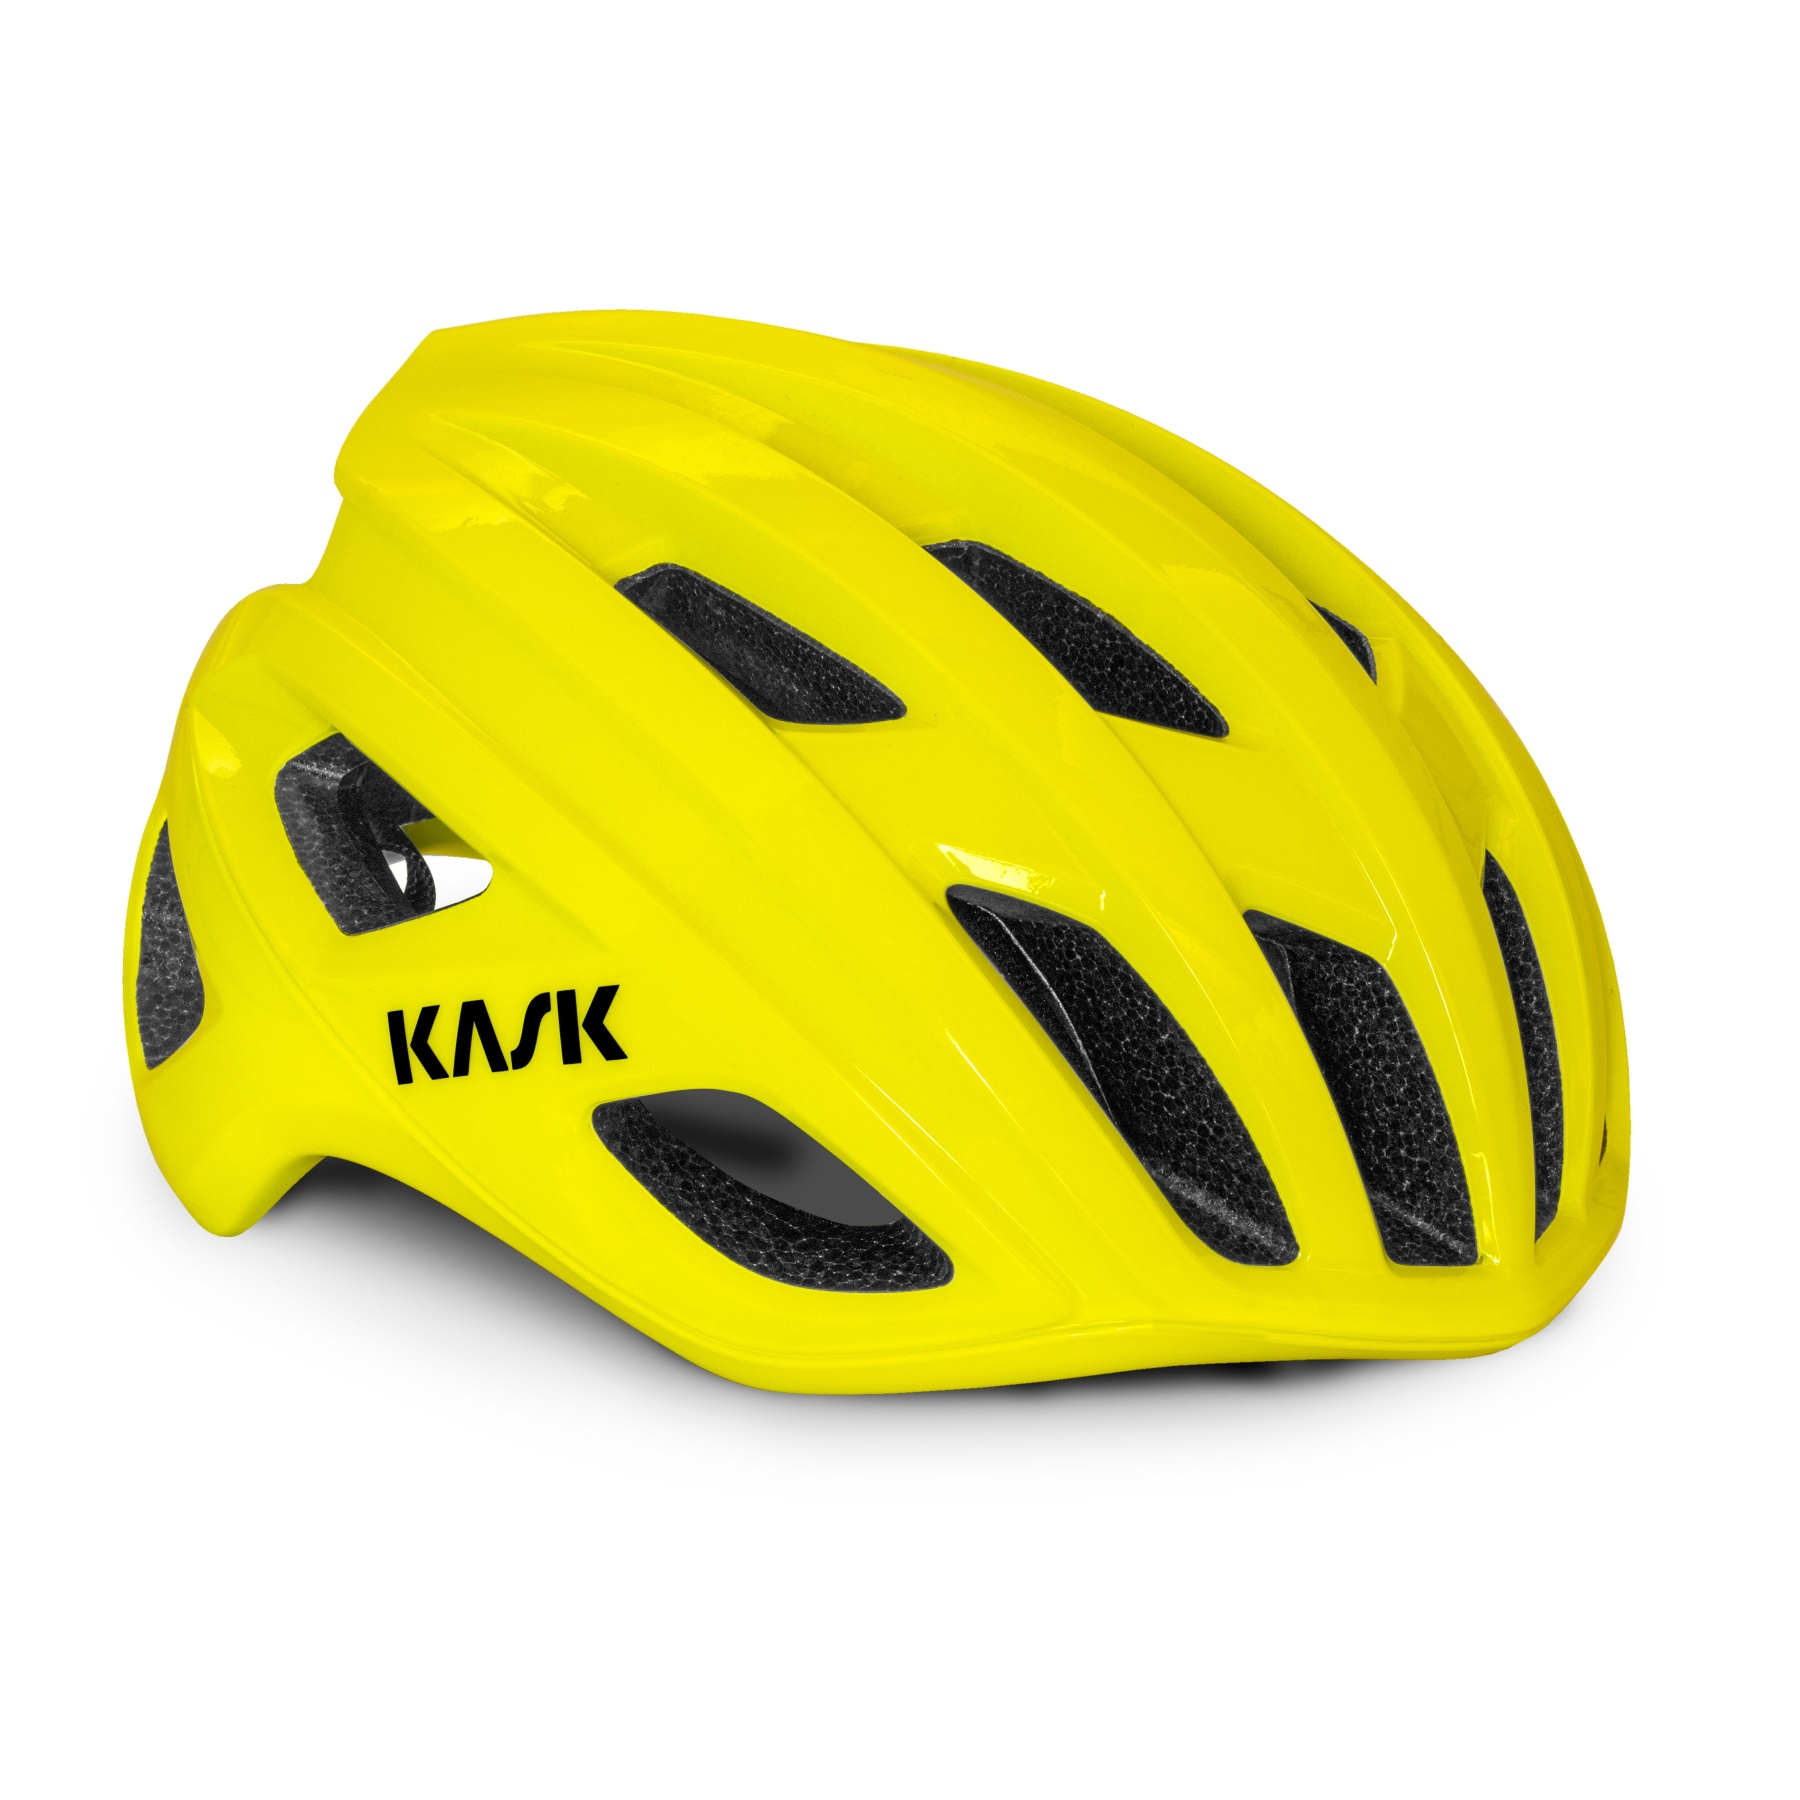 Picture of KASK Mojito³ WG11 Road Helmet - yellow fluo